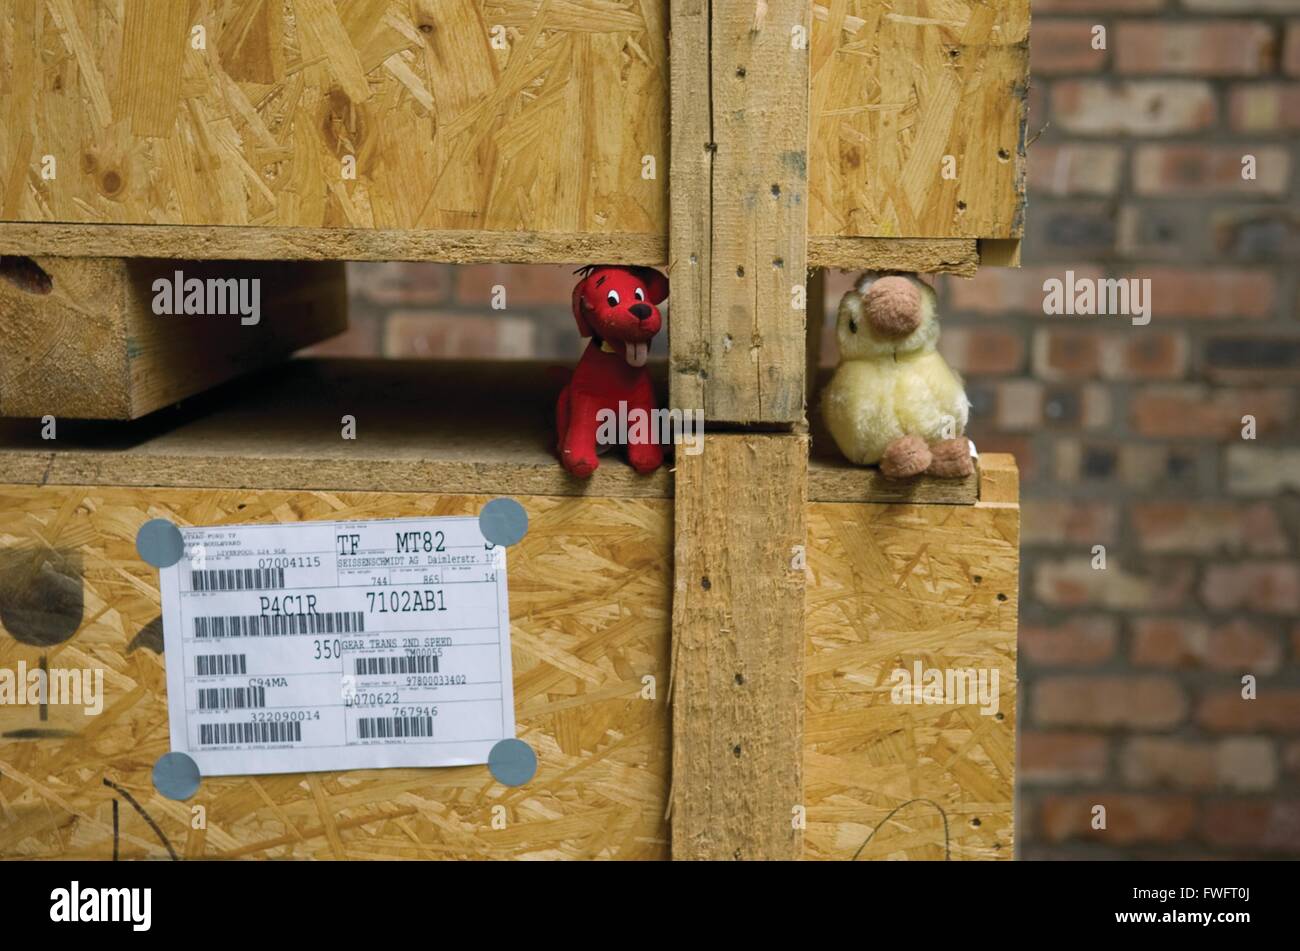 Much Hoole, Preston, Lancashire, UK. A red toy dog and yellow toy duck sit amongst craies in the International Aid Trust Warehouse, waiting to be sent to children in need across the world. Stock Photo